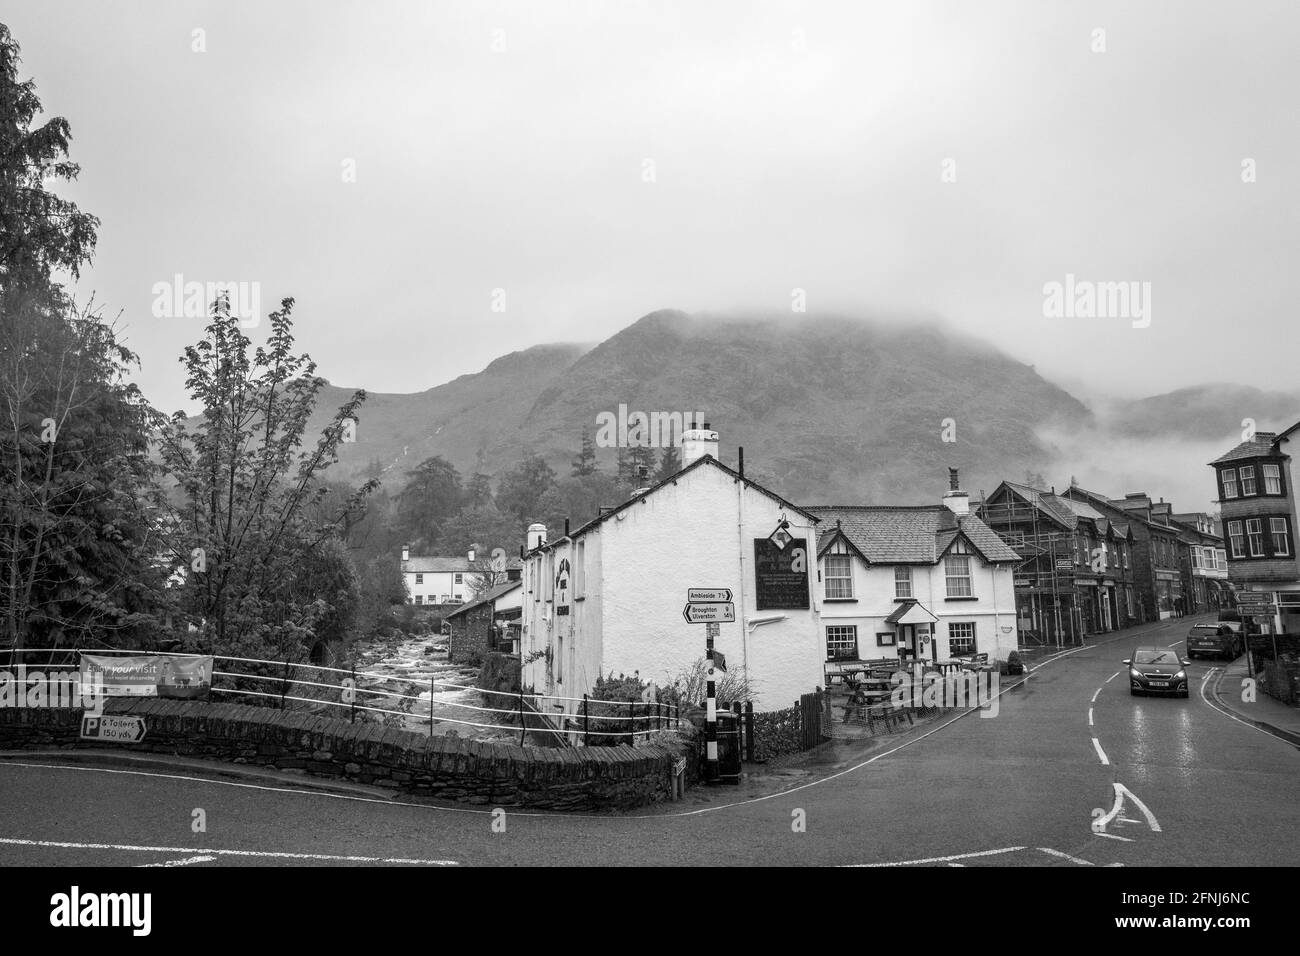 The Black Bull Inn and hotel in Coniston, Cumbria on a rainy day. Stock Photo